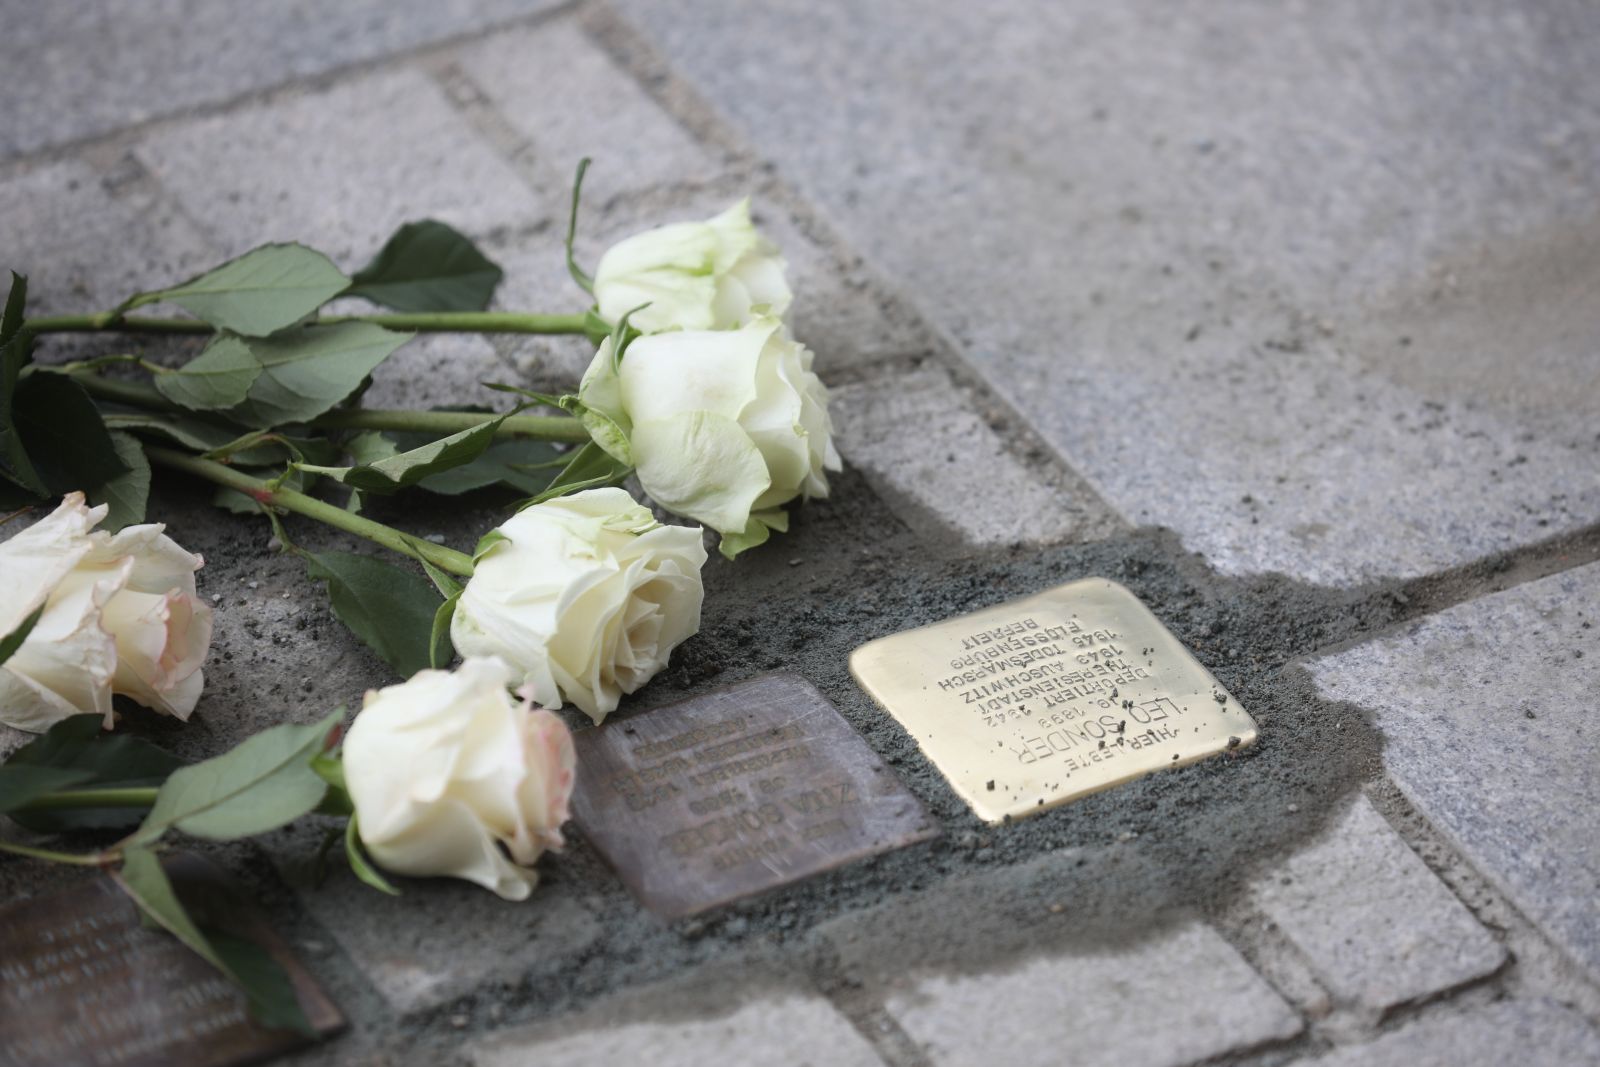 Brass cobblestones on German sidewalks remind people of Jews who were deported and killed by the Nazis.